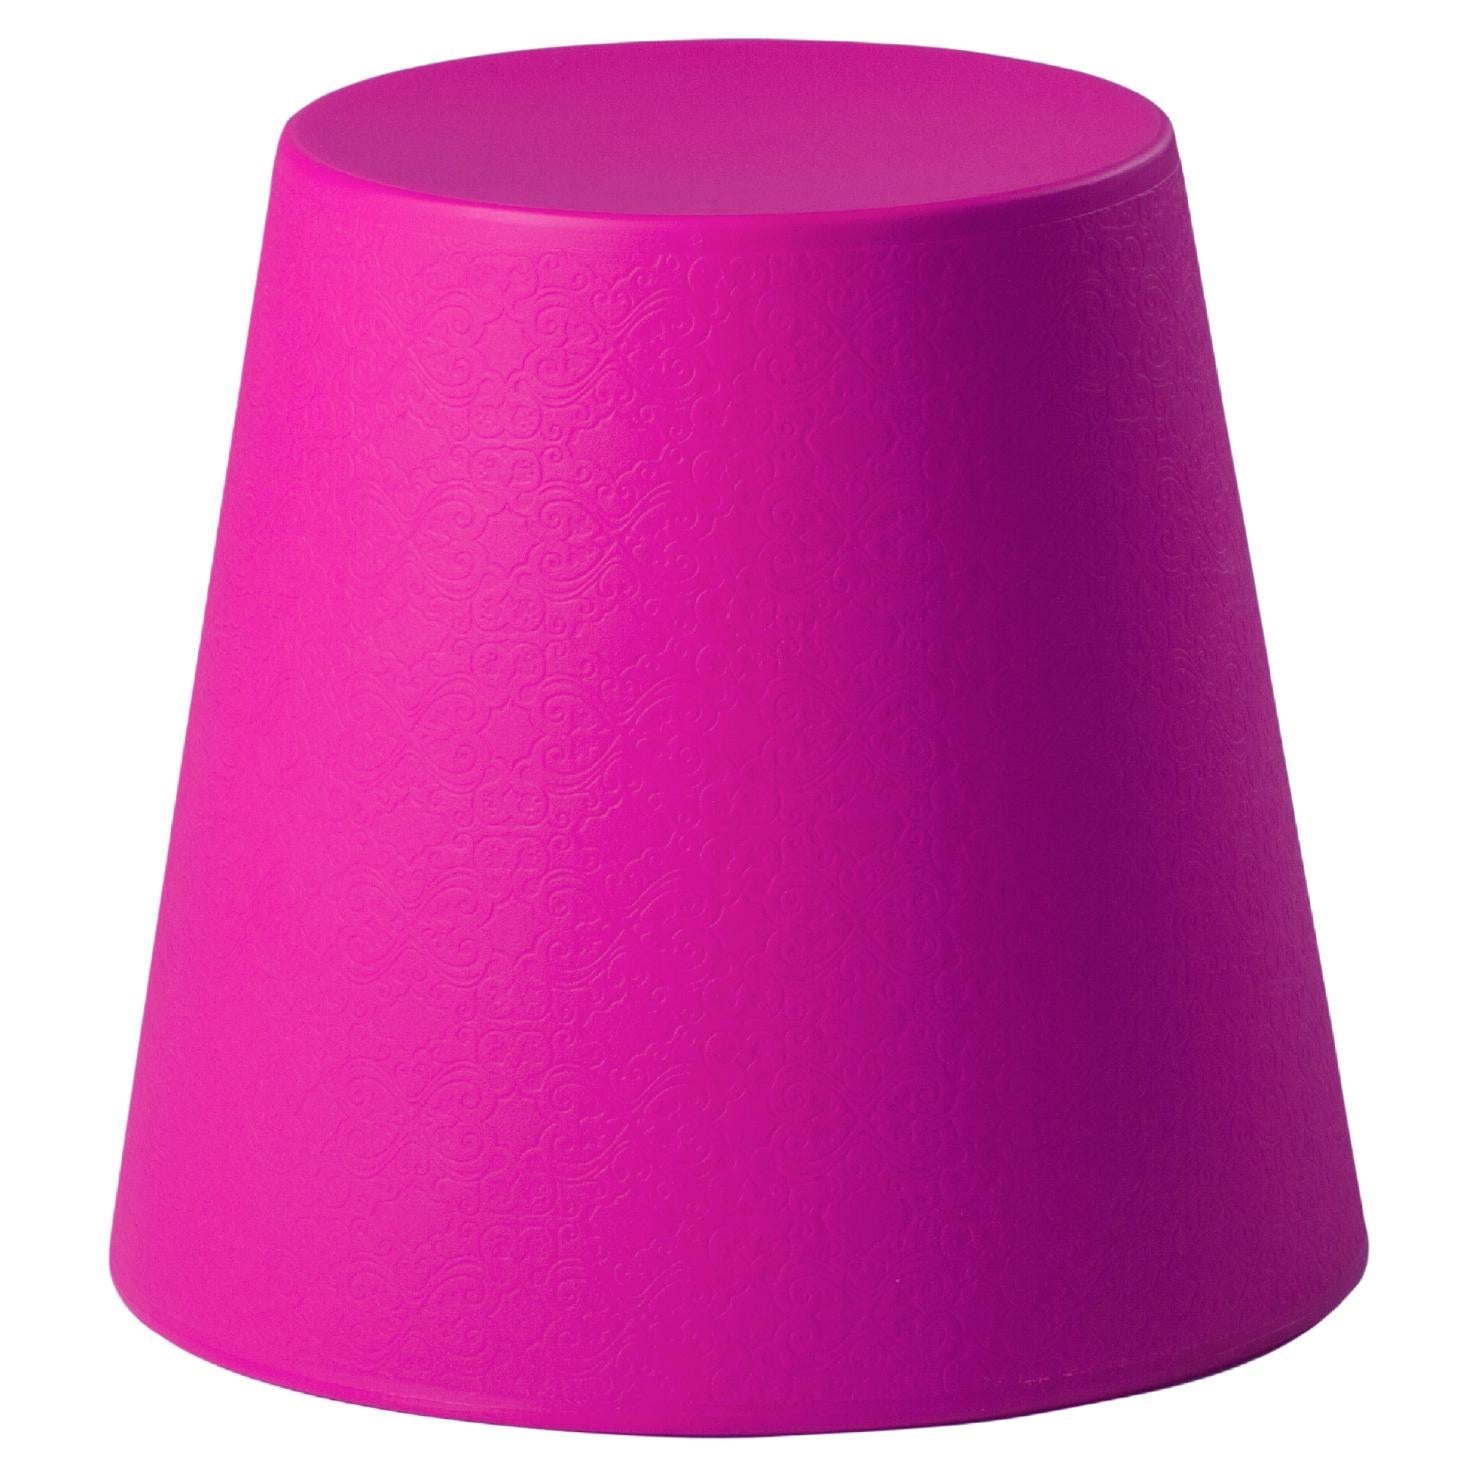 Slide Design Ali Baba Stool in Sweet Fuchsia by Giò Colonna Romano For Sale